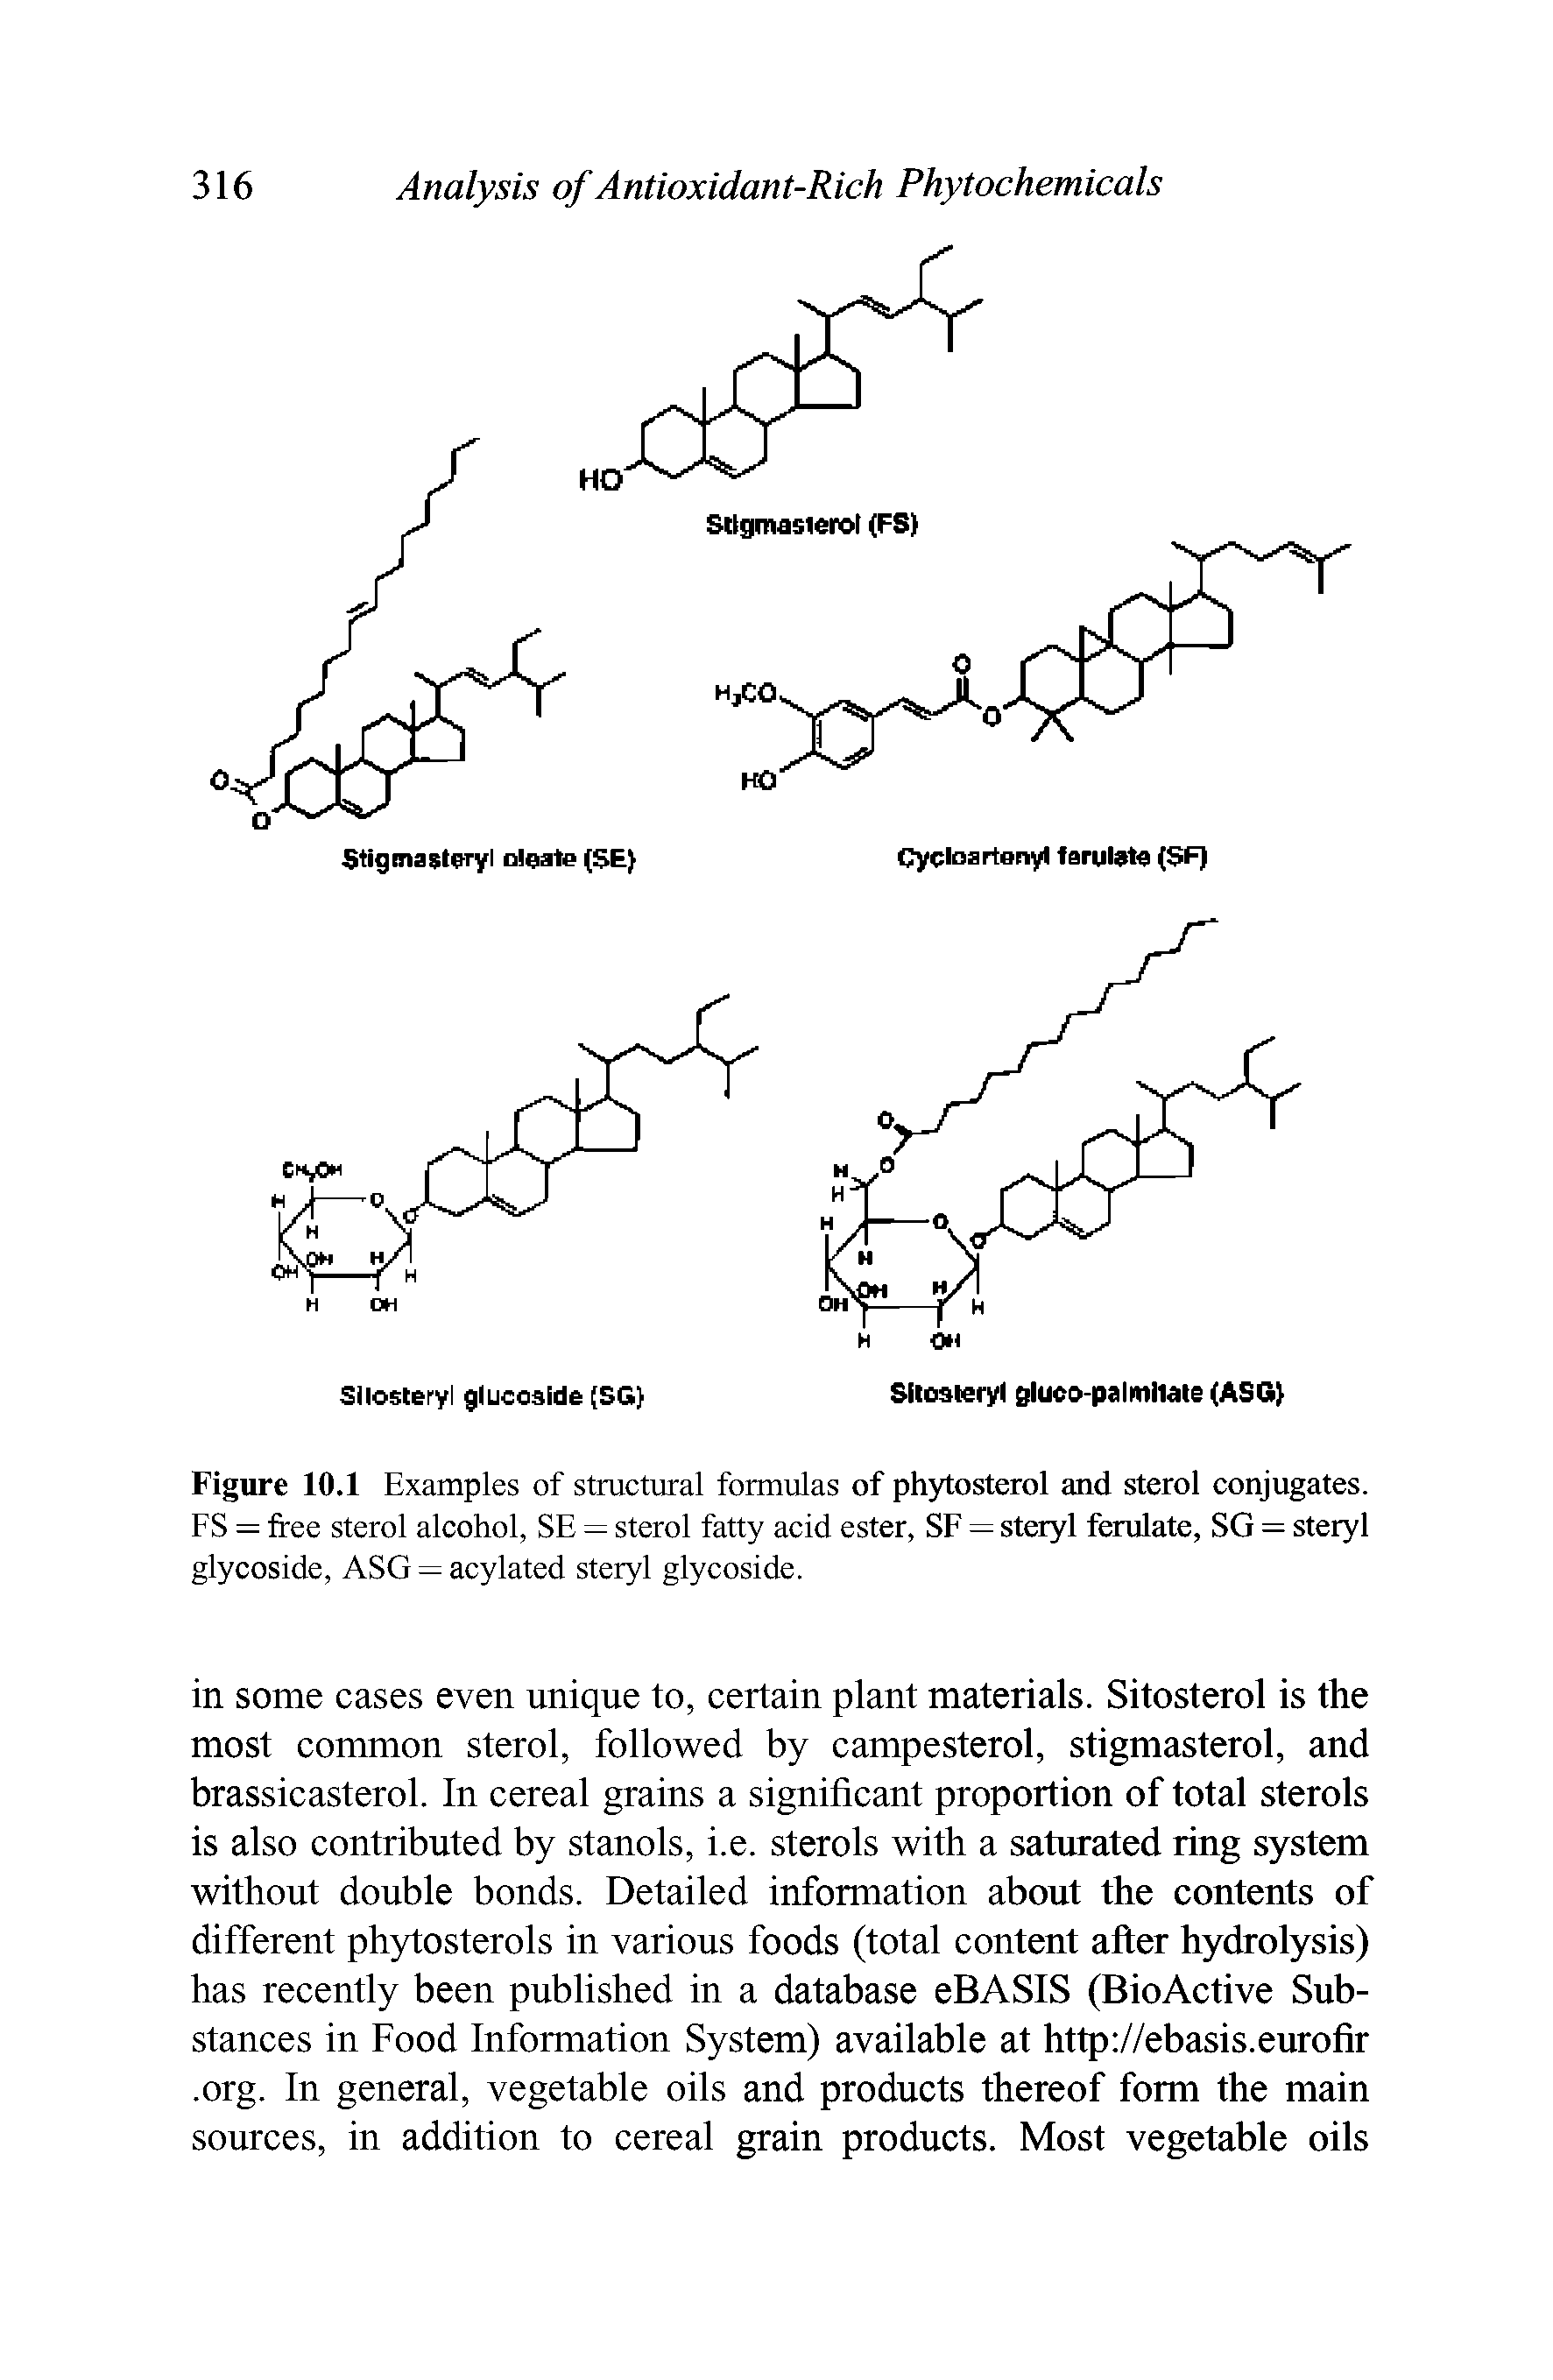 Figure 10.1 Examples of structural formulas of phytosterol and sterol conjugates. FS = free sterol alcohol, SE = sterol fatty acid ester, SF = steryl ferulate, SG = steryl glycoside, ASG = acylated steryl glycoside.